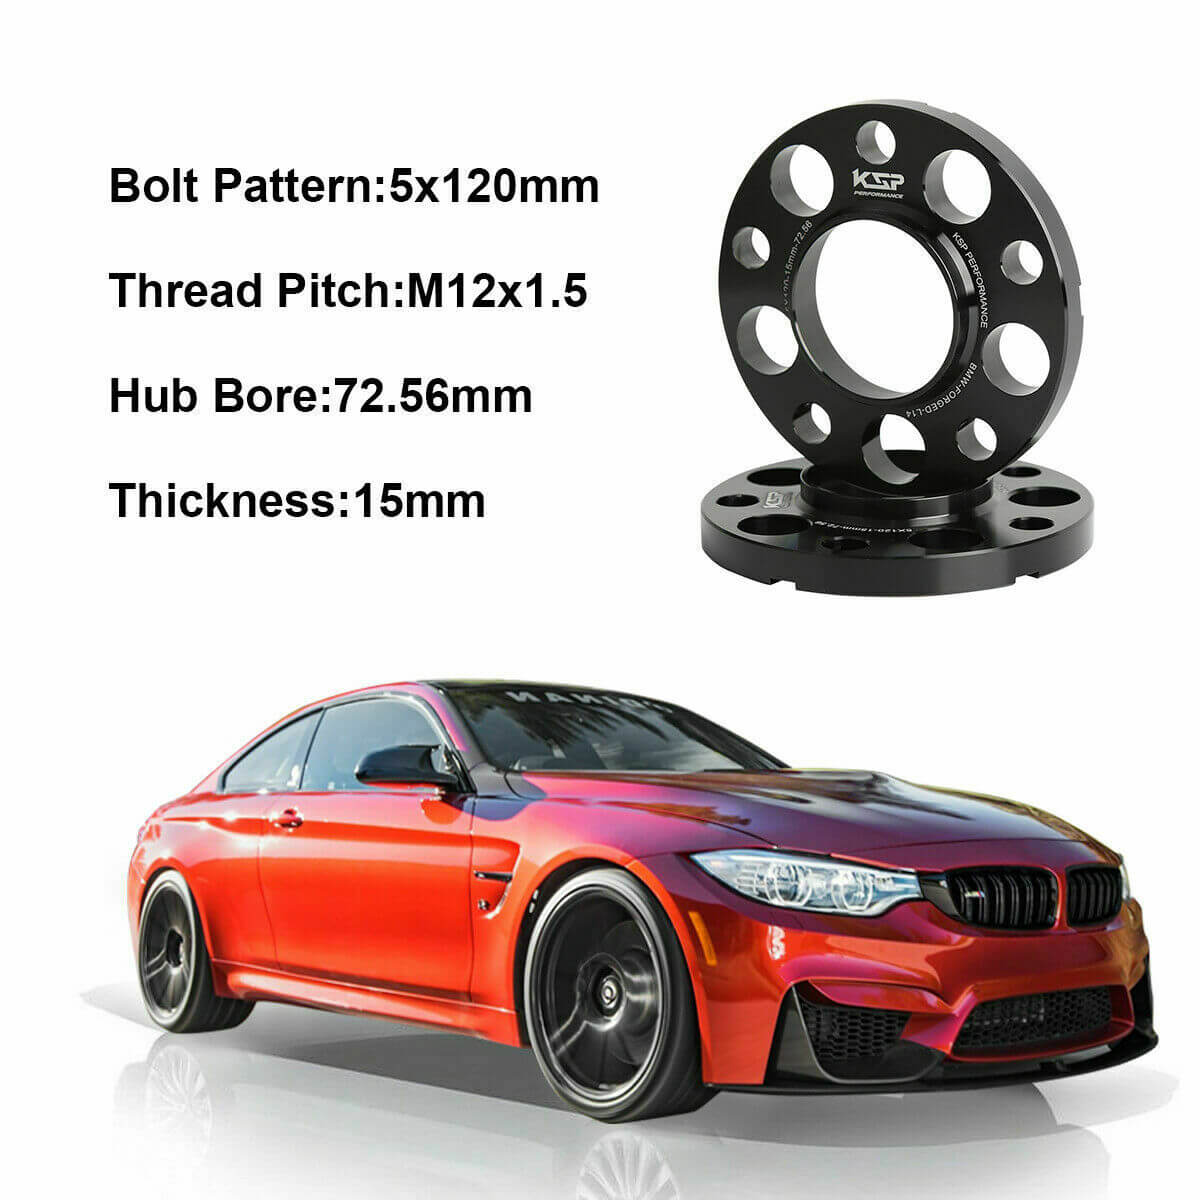 Hubcentric Wheel Spacers 2PC 5x120mm 72.56CB for BMW 318i 323i E46 M3 xccscss.